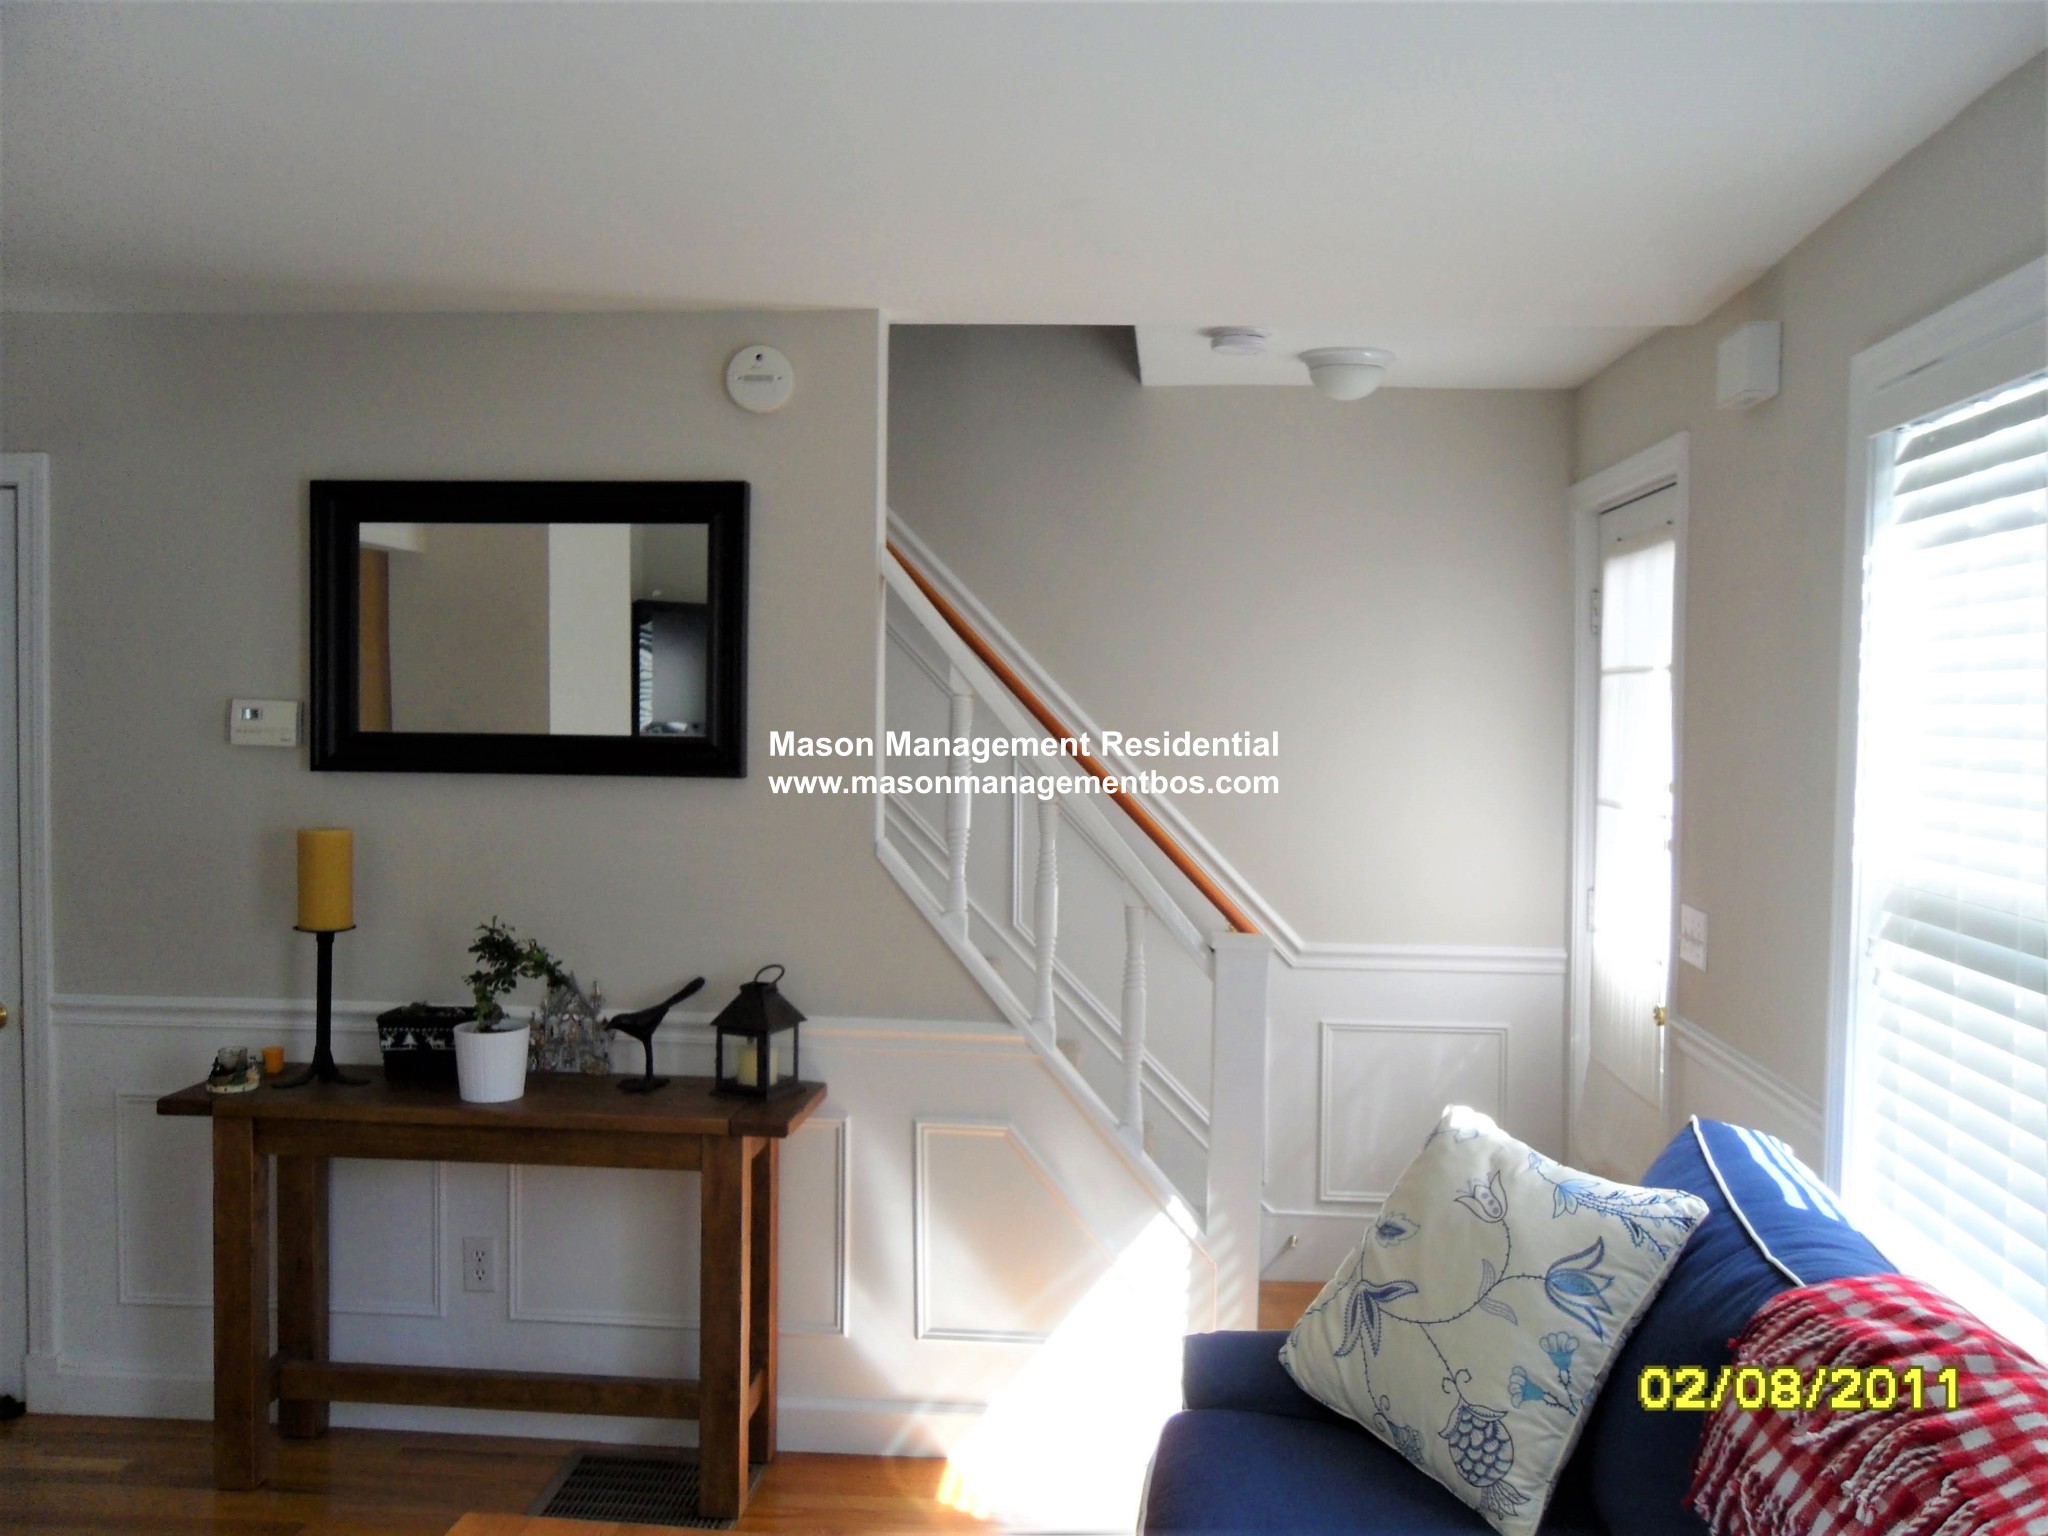 Photos of apartment on Tremont Pl.,Somerville MA 02143